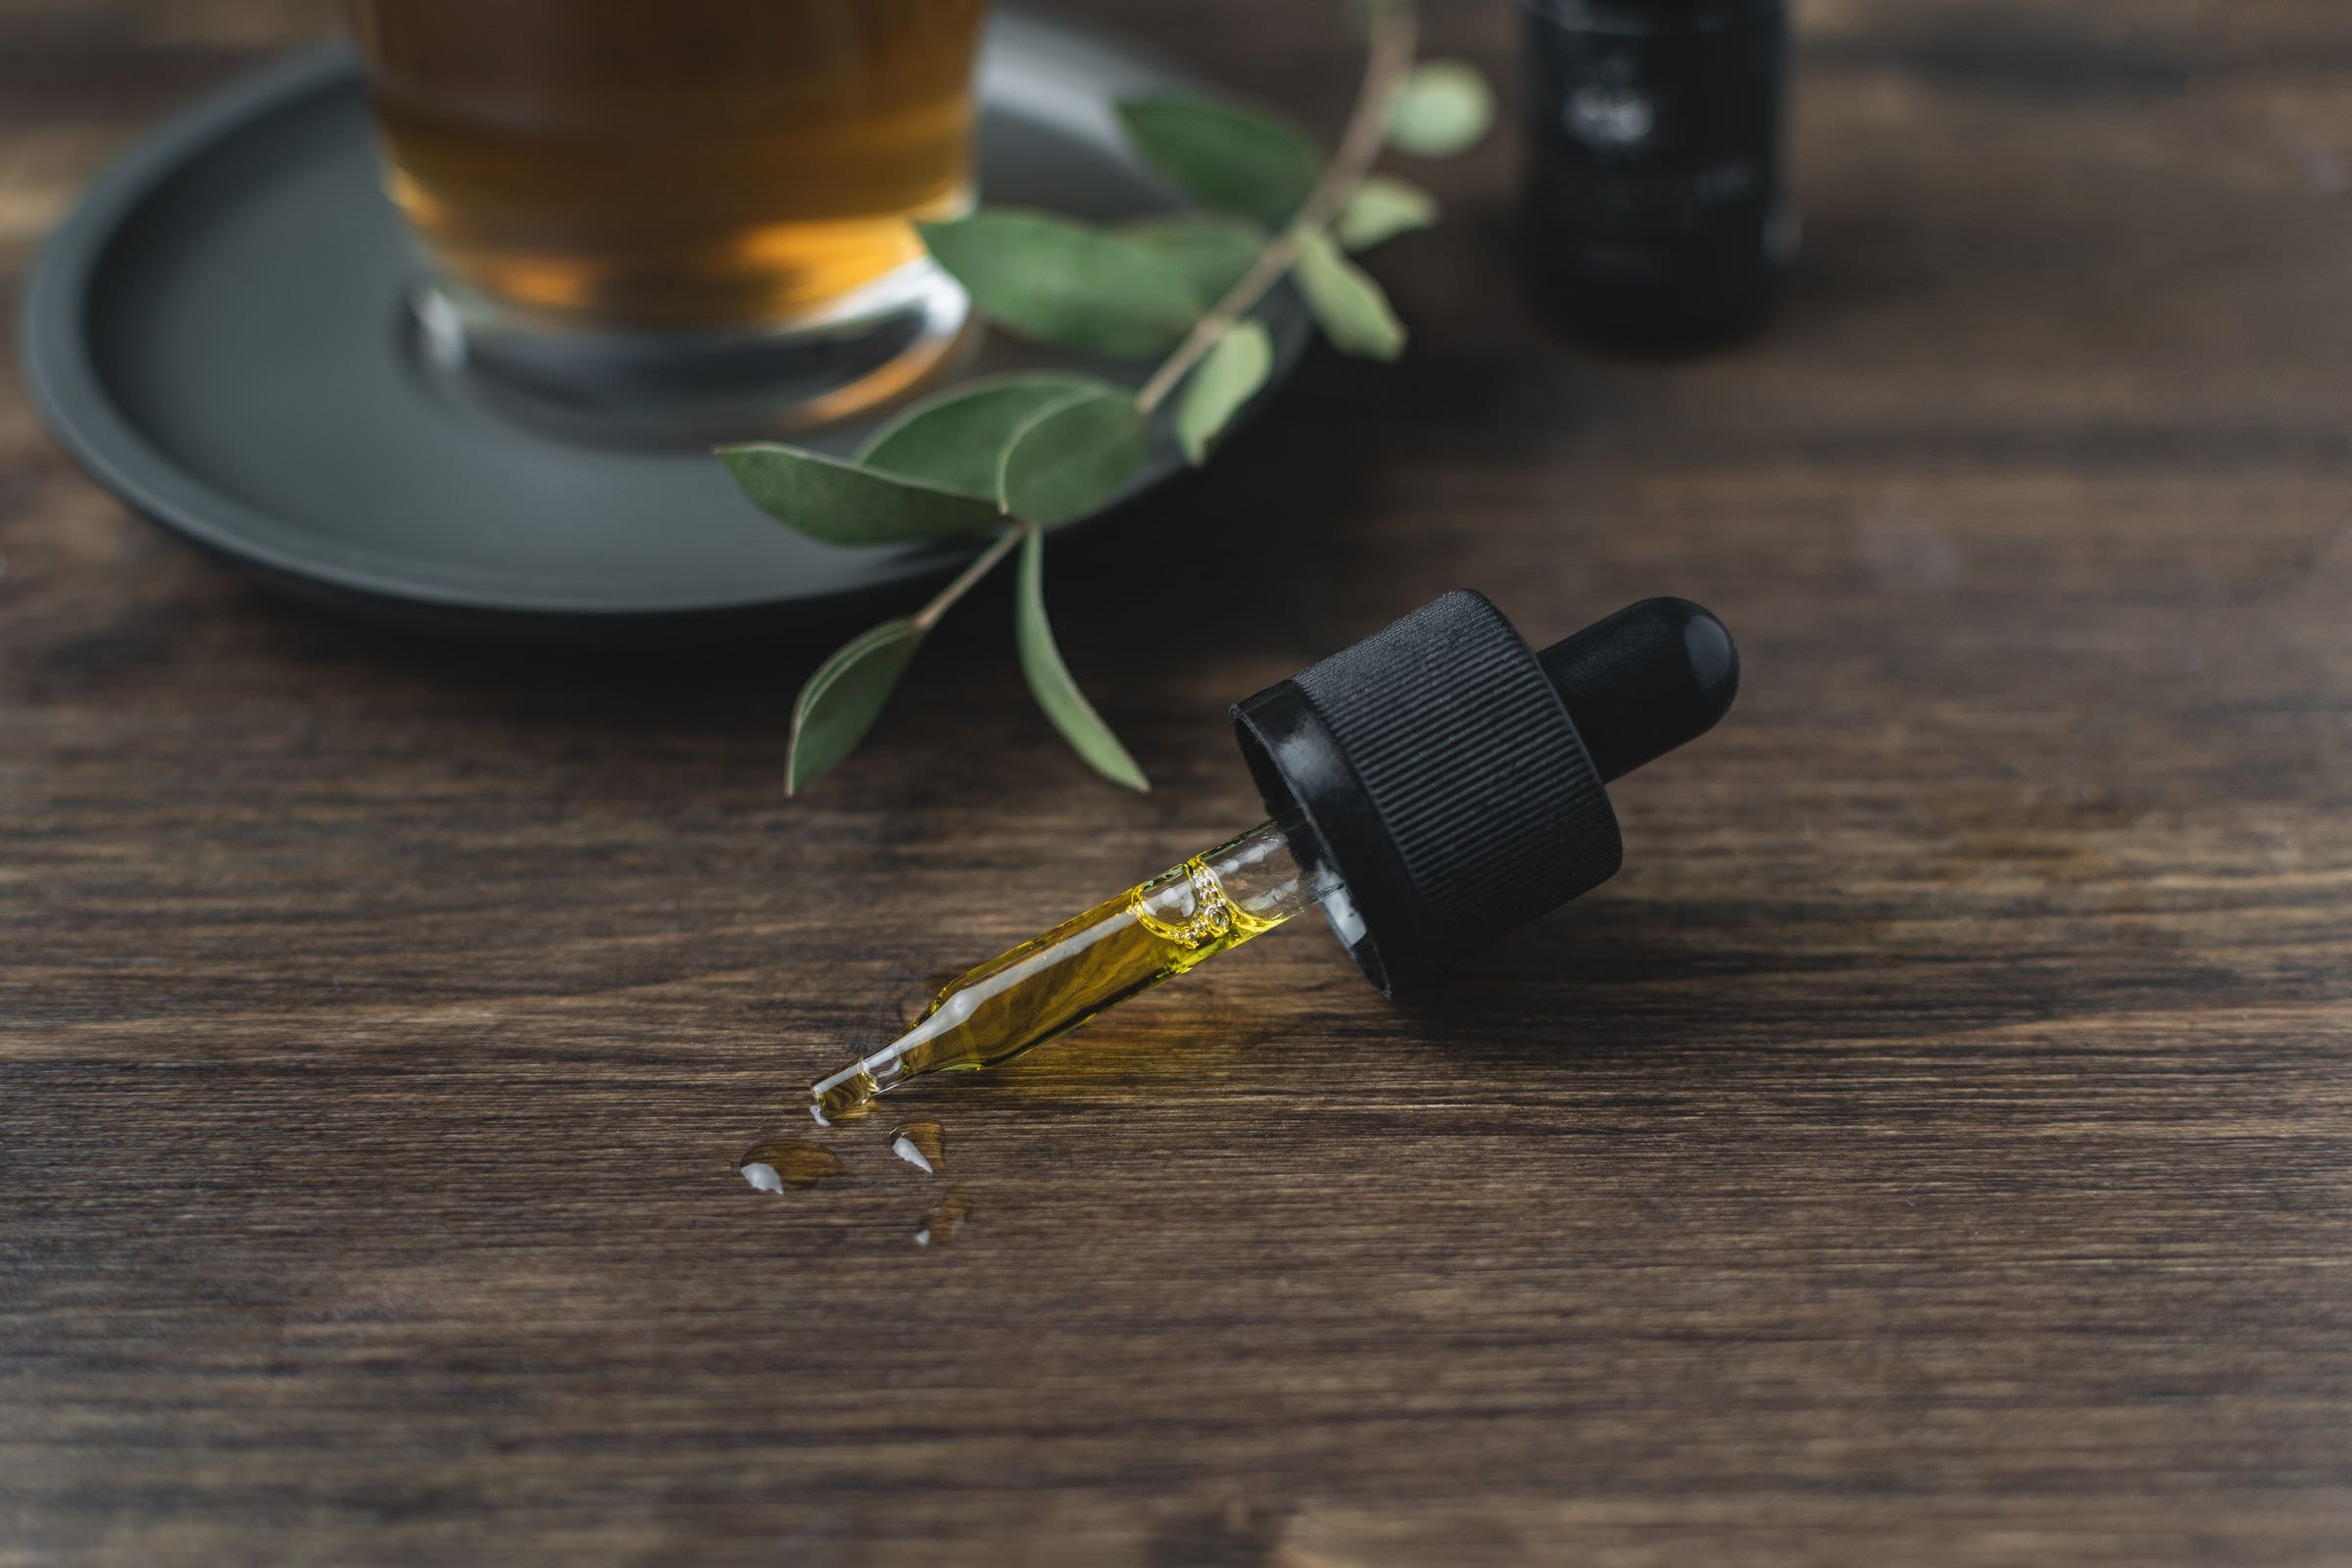 Lawsuits Against Curaleaf Pile Up Following CBD-THC Labeling Debacle